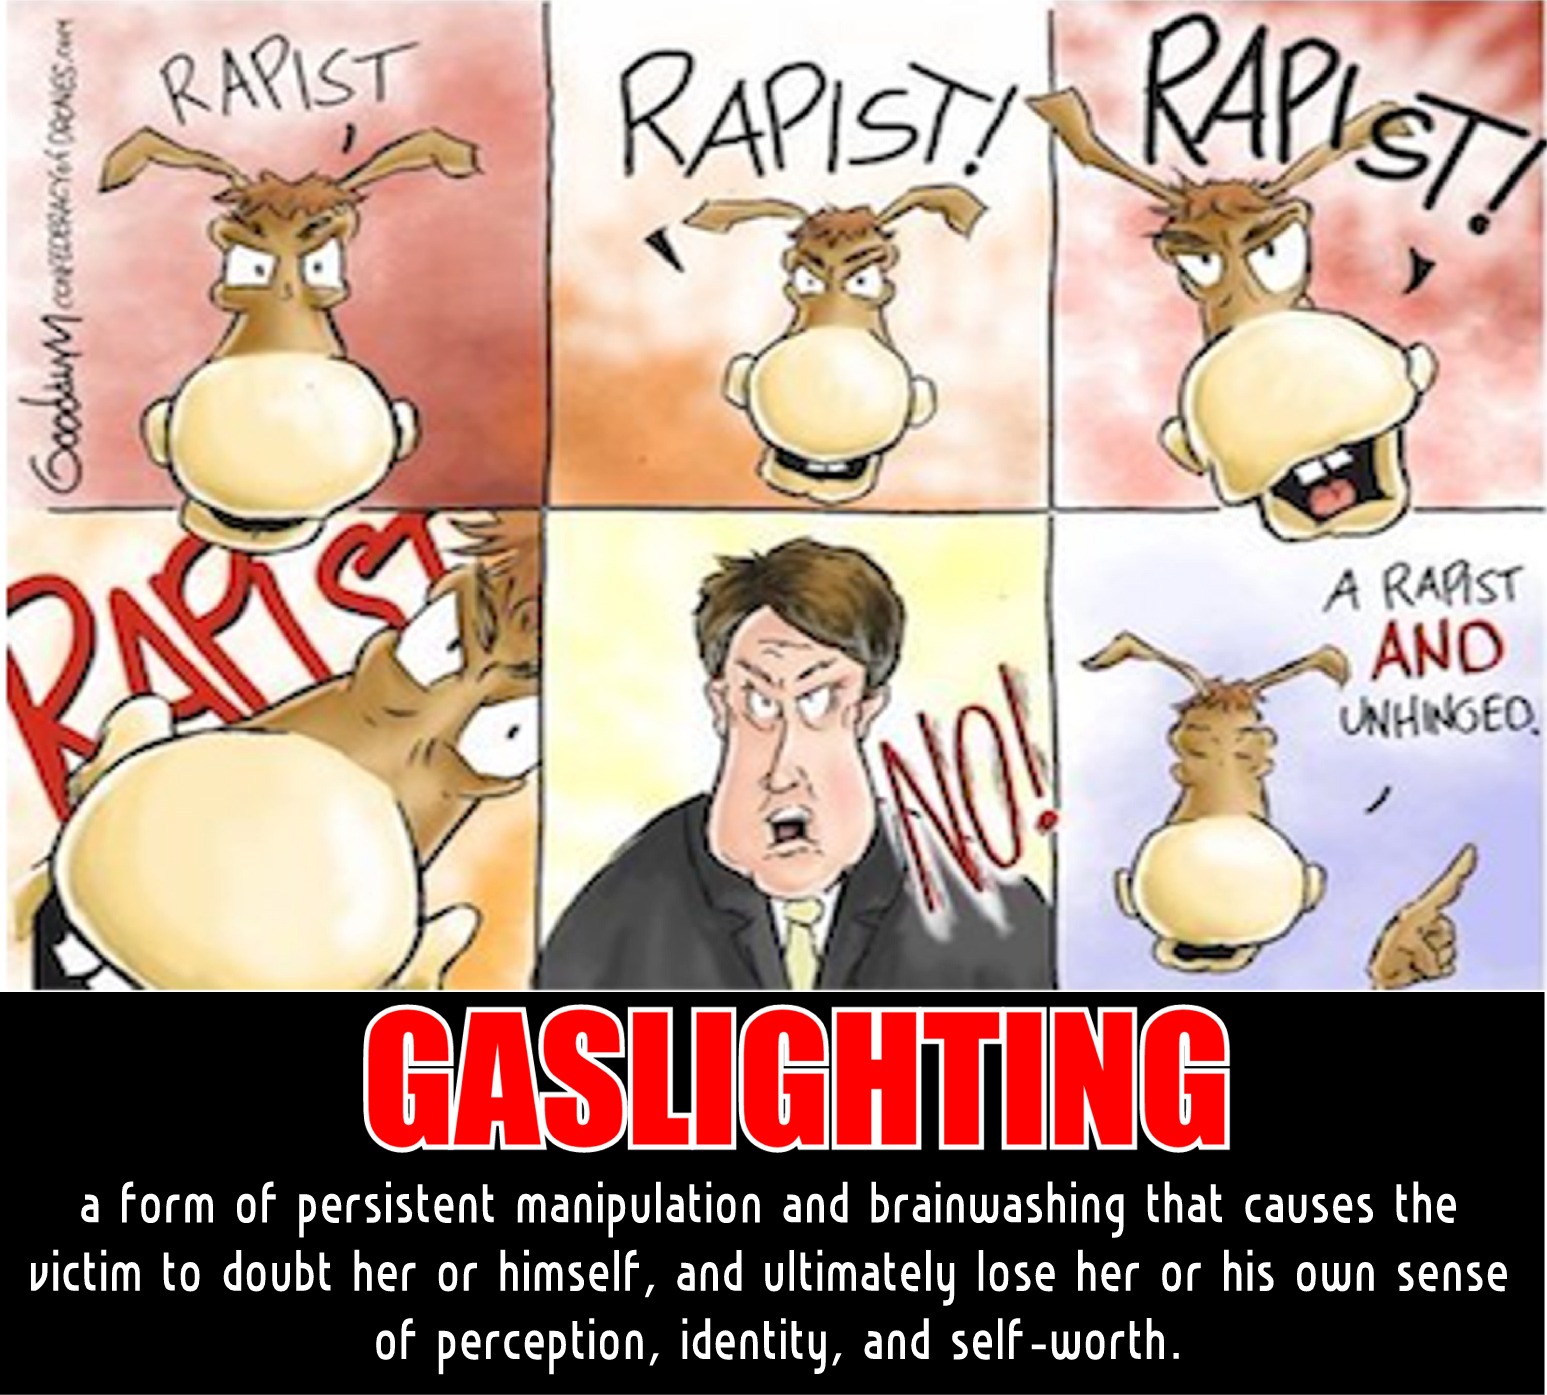 cartoon - Rapist Rapist! Rapist Raise A Rapist And Unhinged Gaslighting a form of persistent manipulation and brainwashing that causes the victim to doubt her or himself, and ultimately lose her or his own sense of perception, identity, and selfworth.